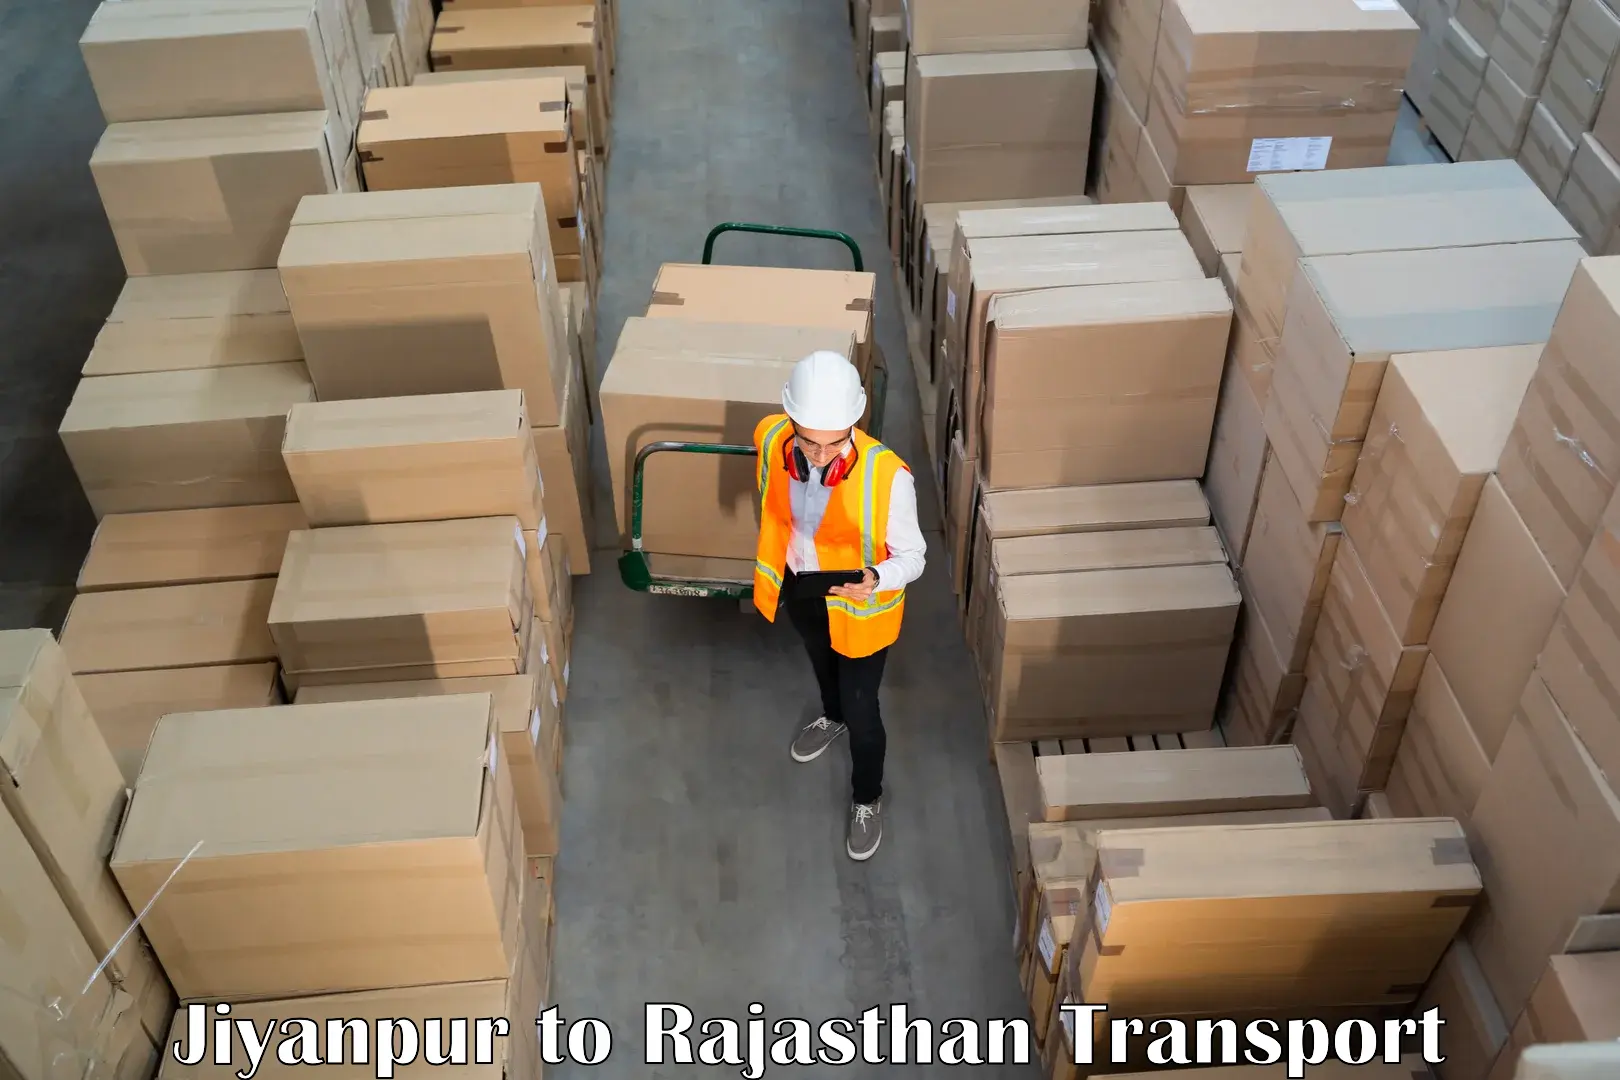 Goods delivery service Jiyanpur to Rajasthan